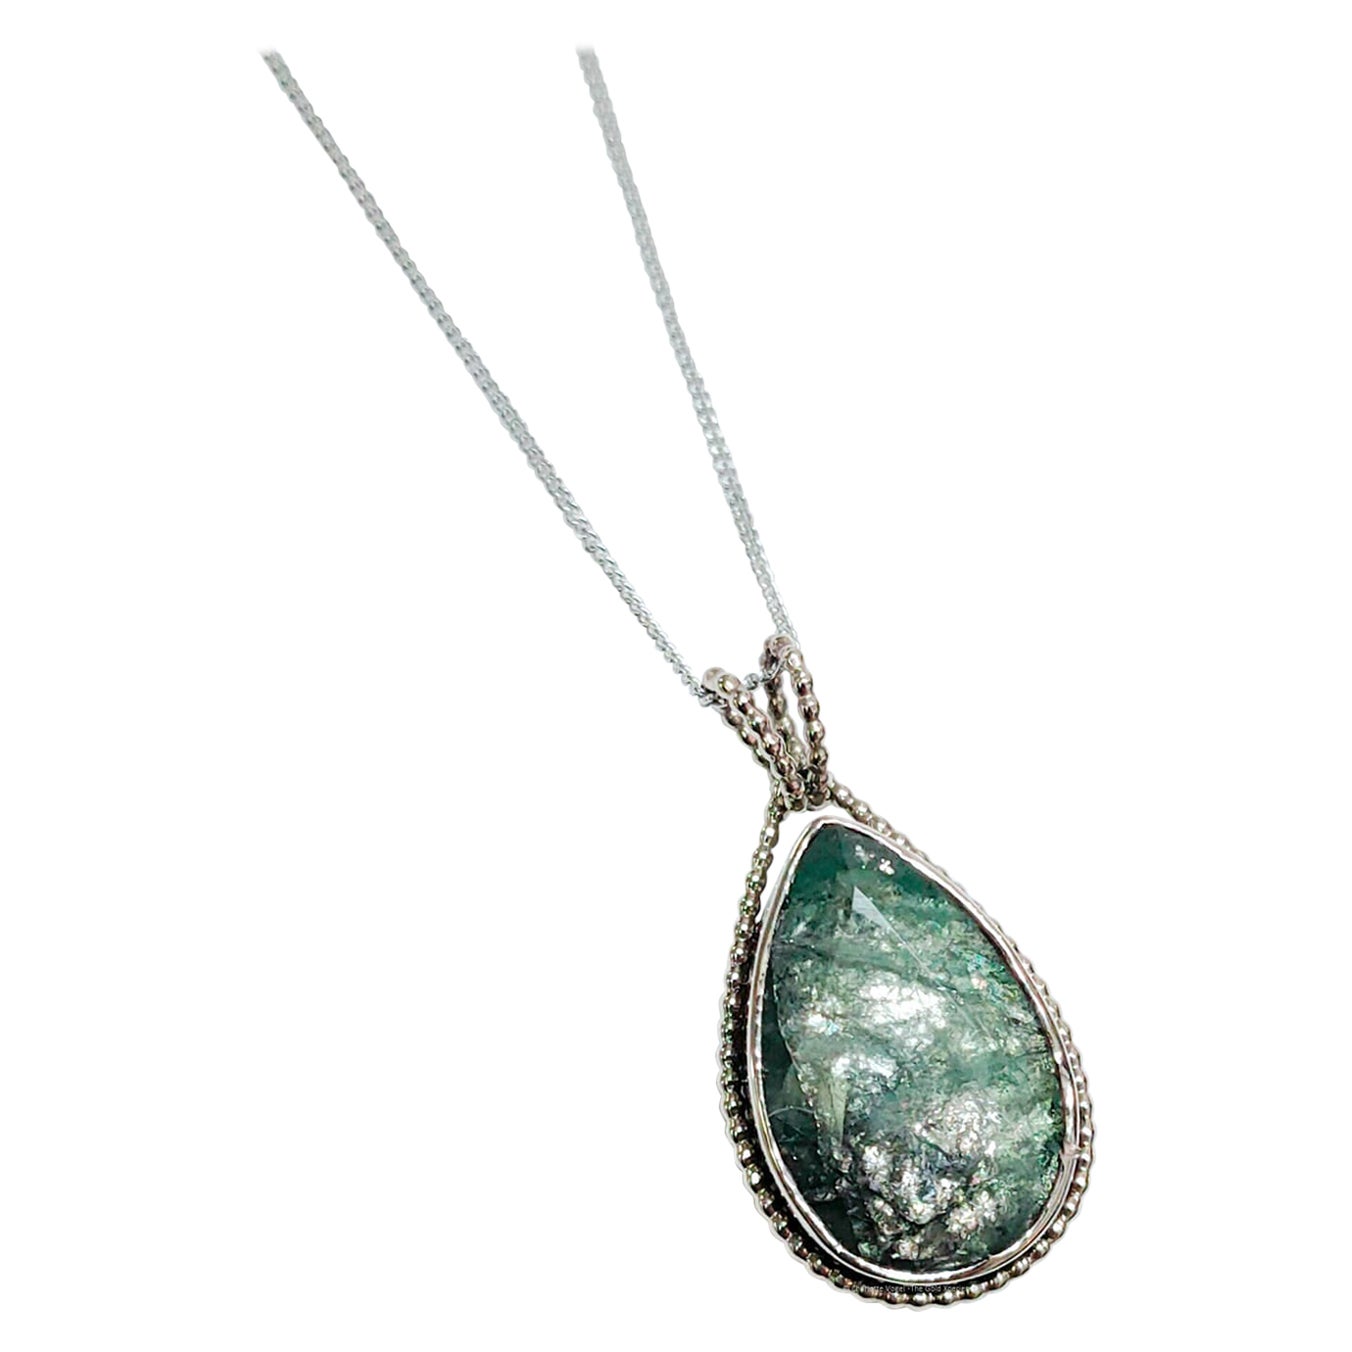 Necklace with white gold pendant emerald For Sale